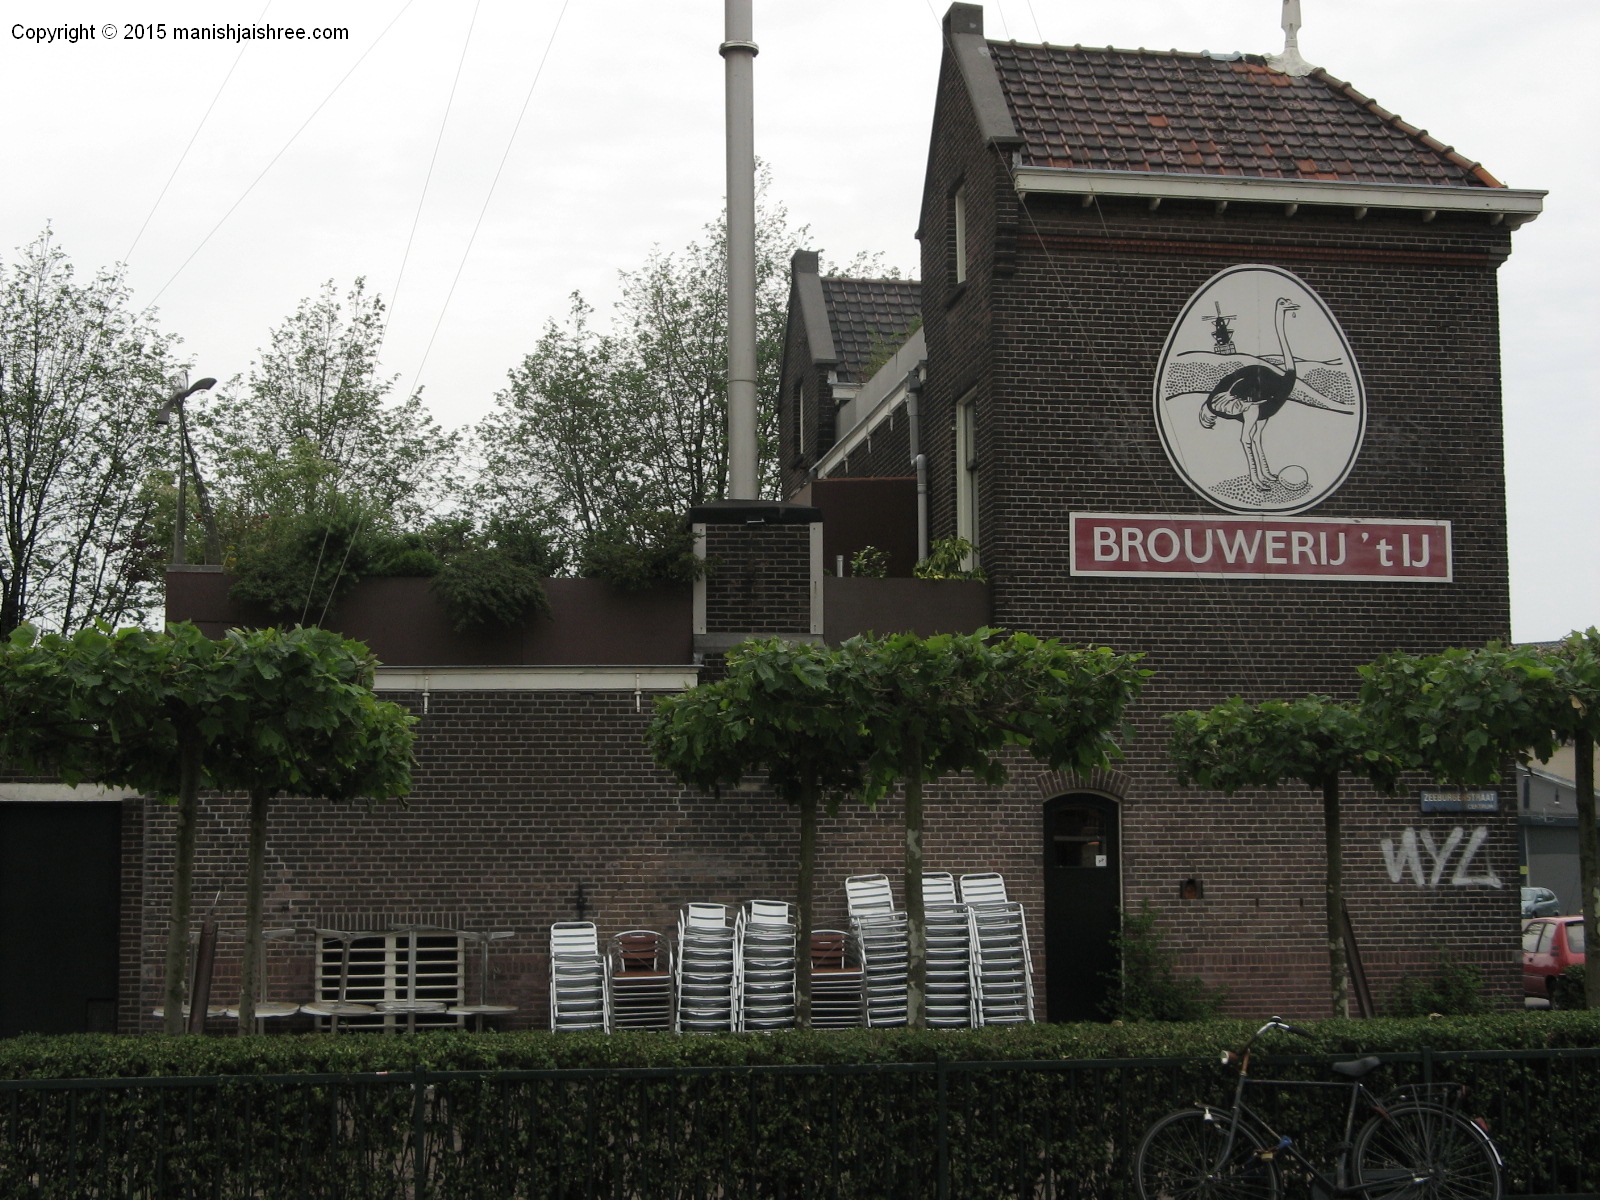 The old brewery, Amsterdam